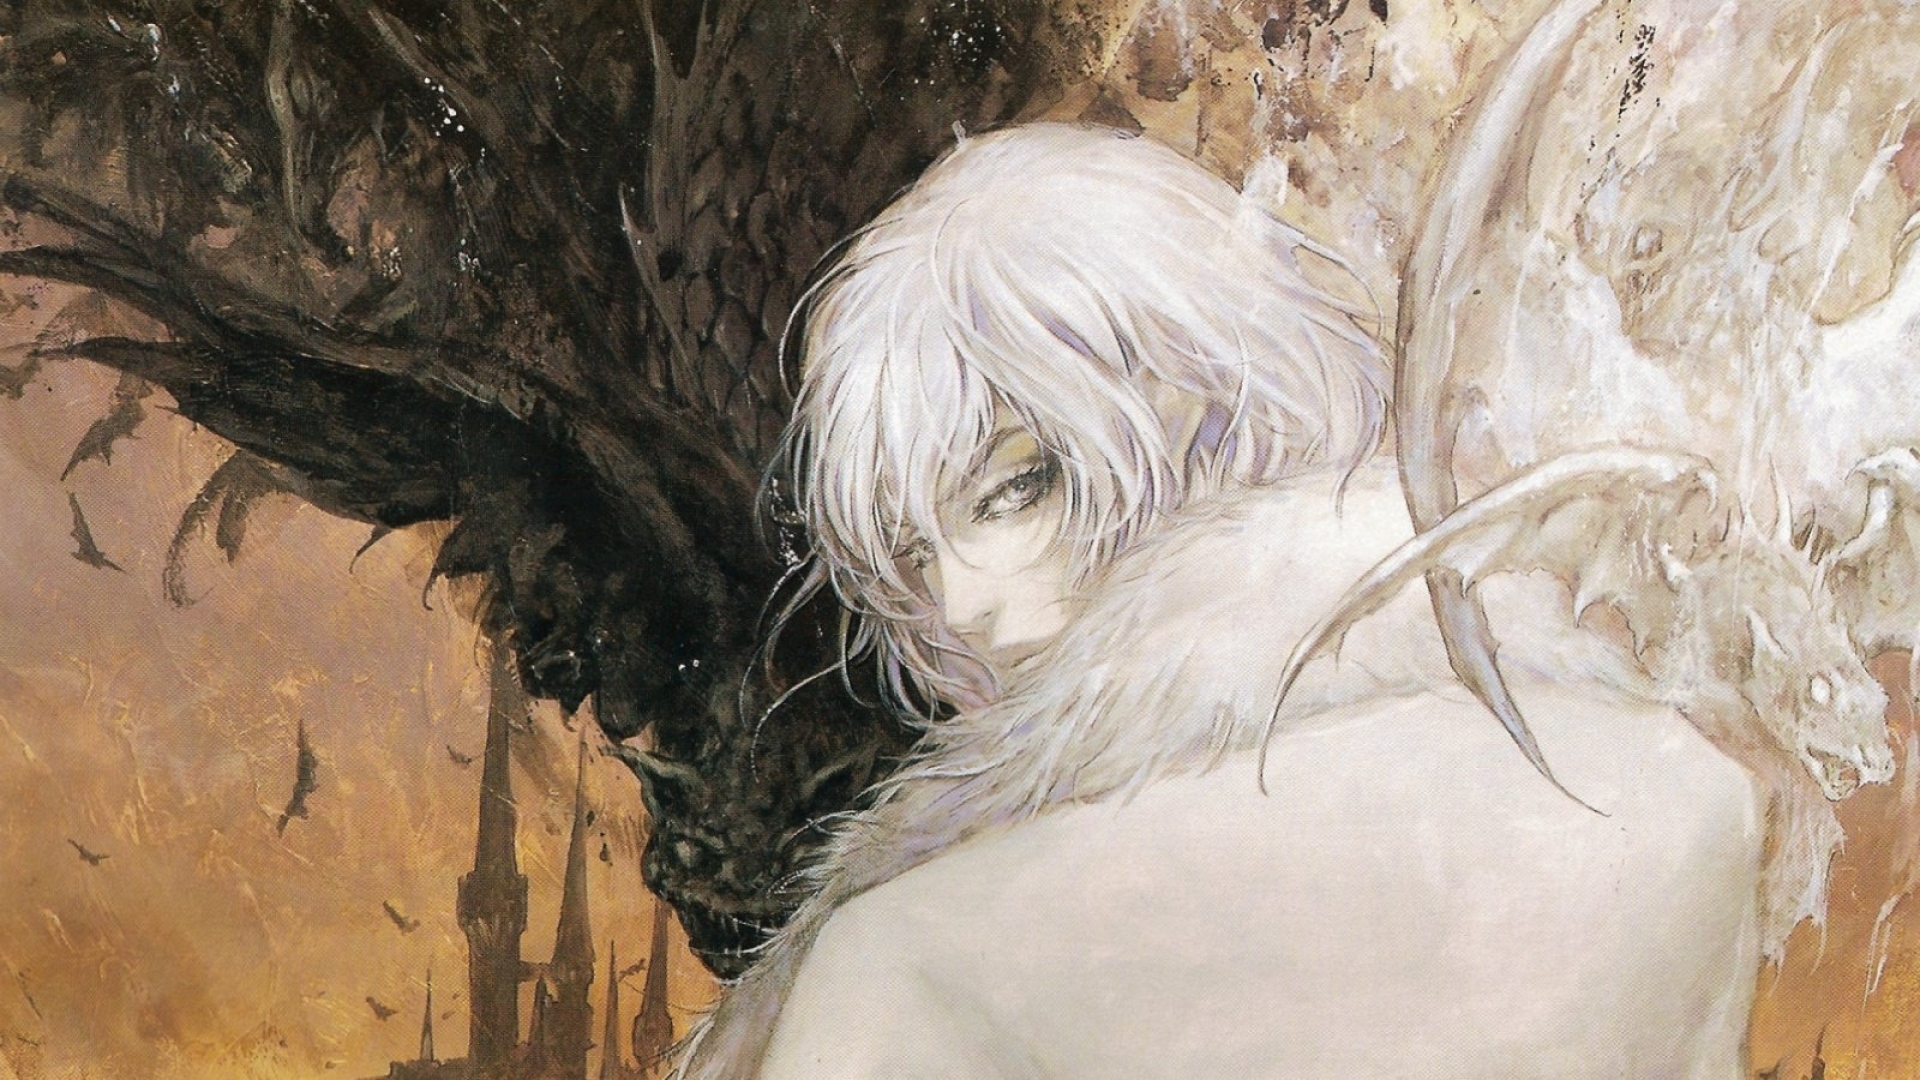 Castlevania: Aria of Sorrow Details - LaunchBox Games Database